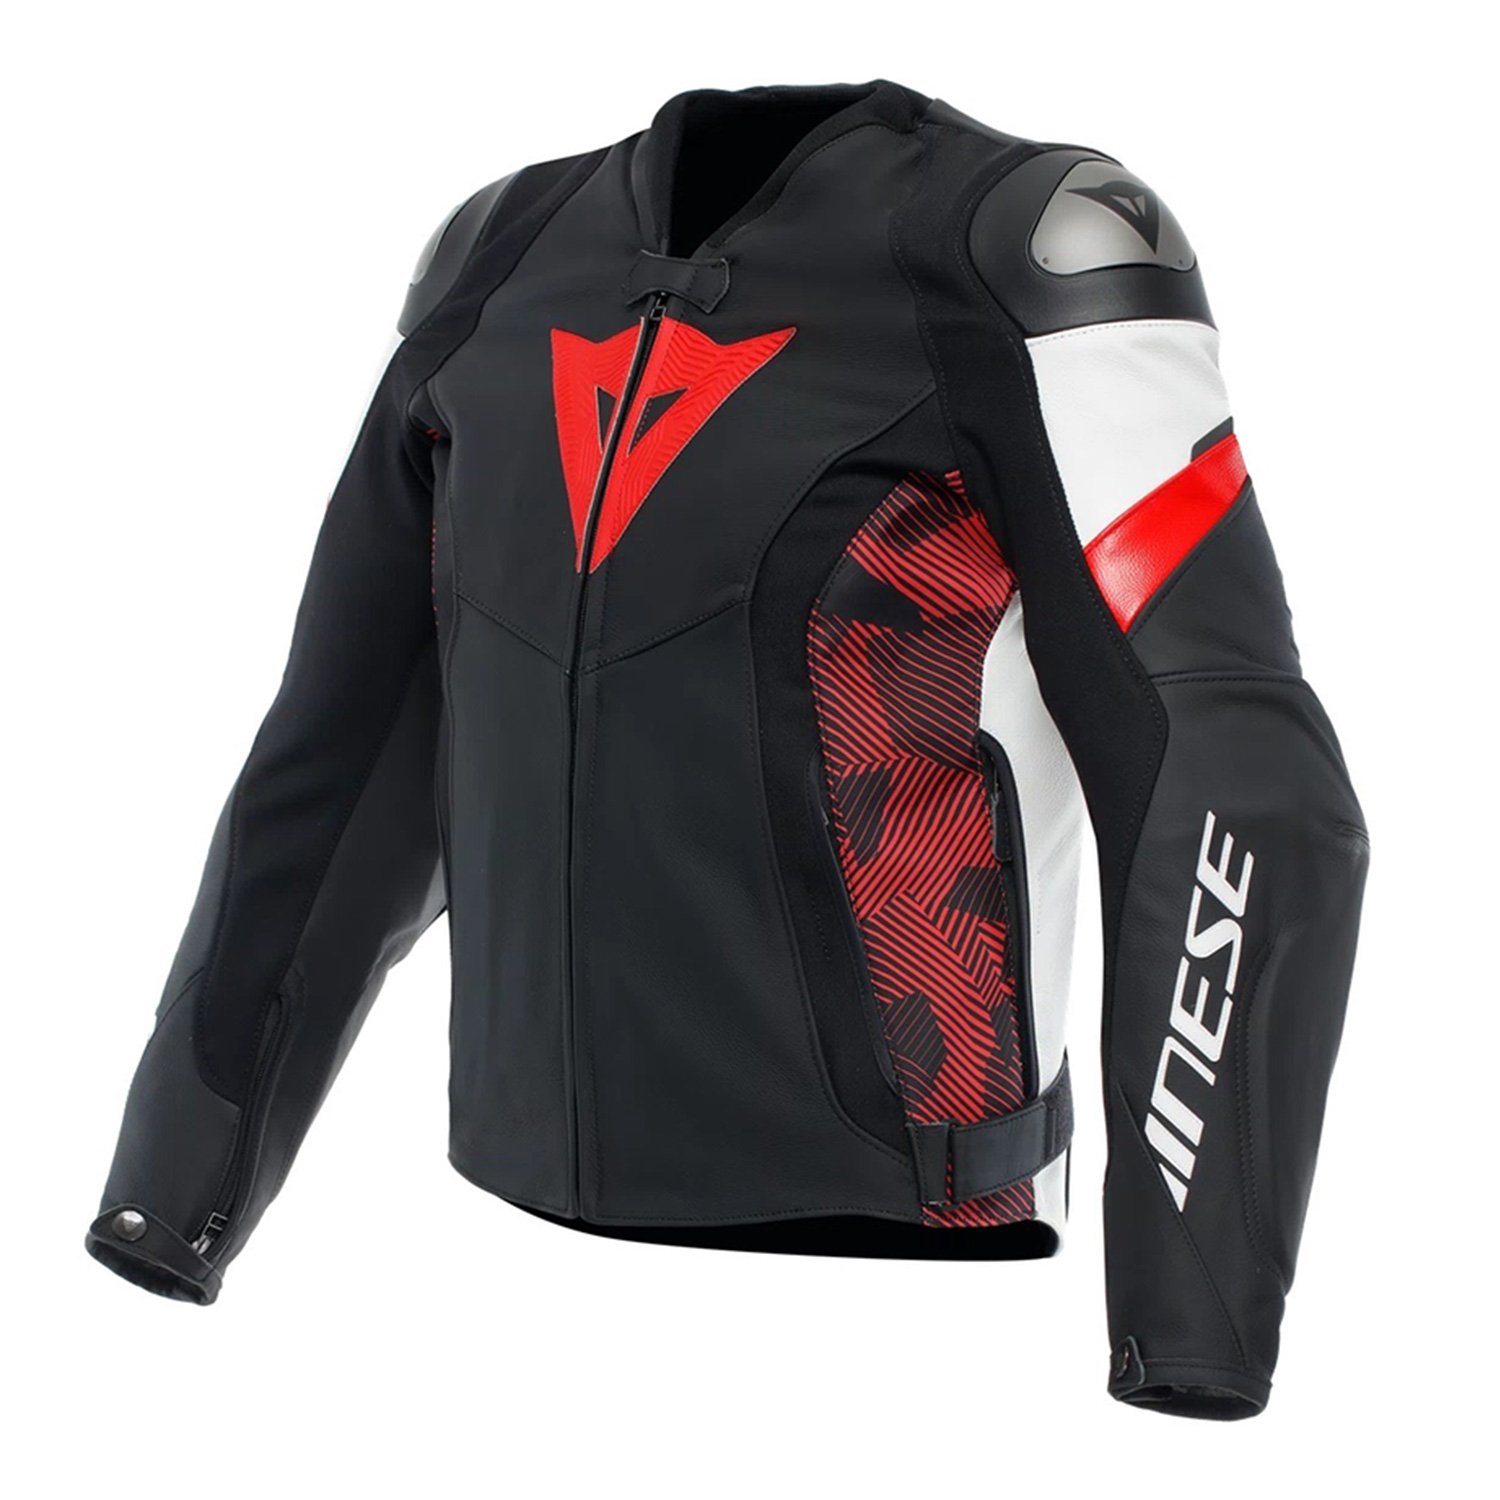 Image of Dainese Avro Leather 5 Jacket Black Red Lava White Size 44 ID 8051019639608